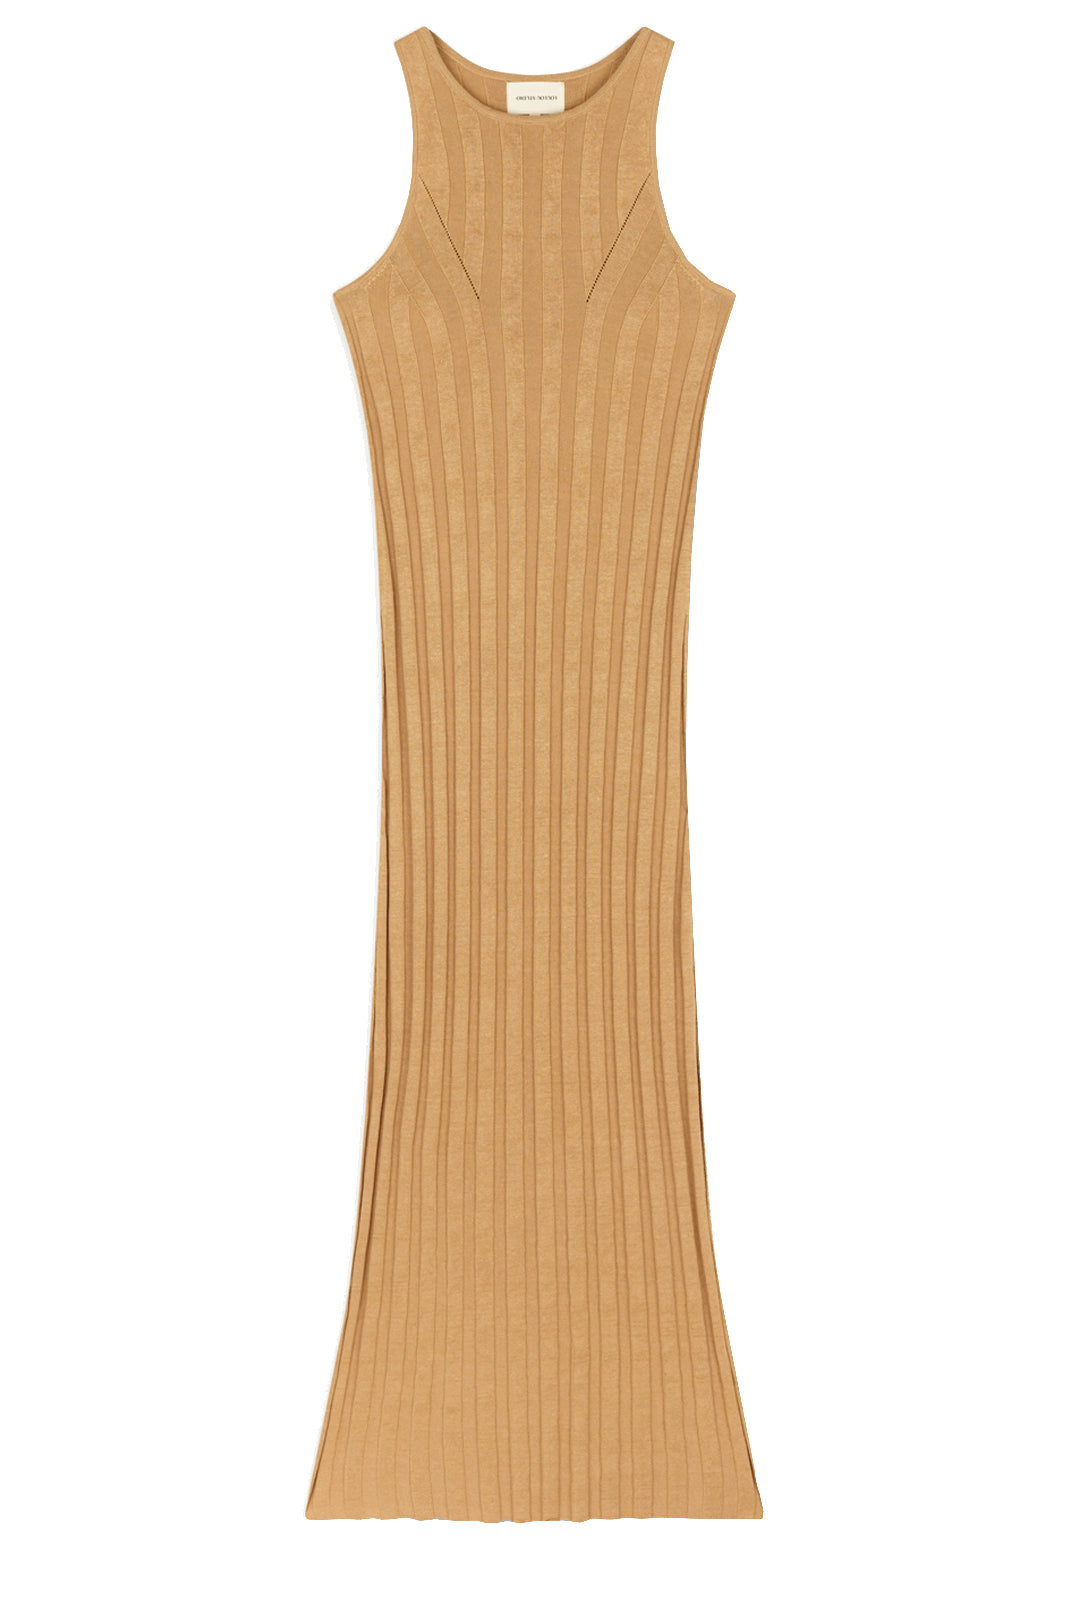 Loulou Studio // Beige Ribbed Knit Kale Dress – VSP Consignment